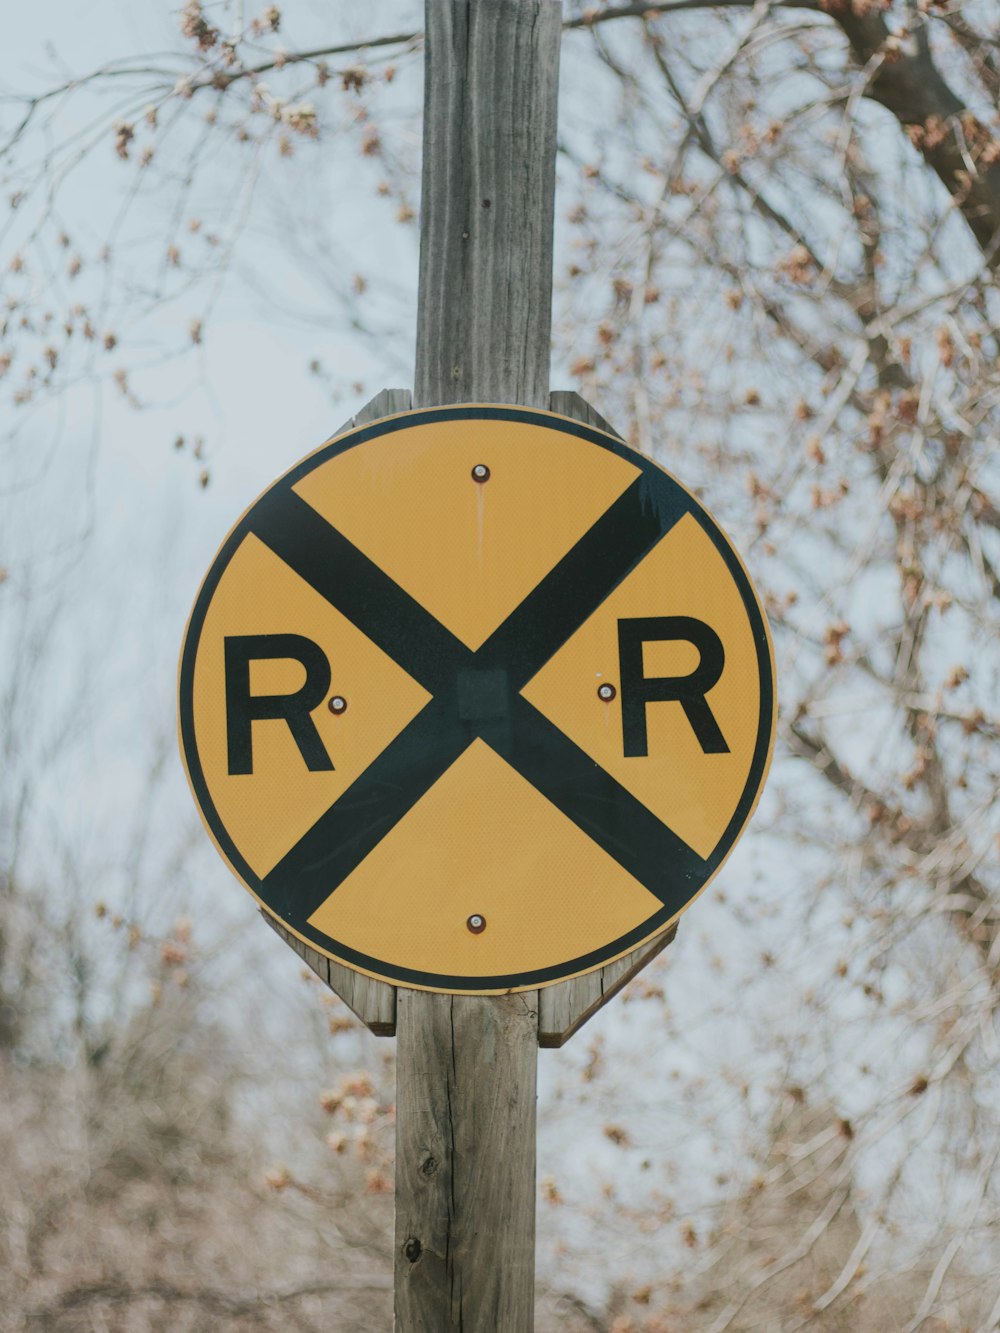 a railroad crossing sign on a wooden pole